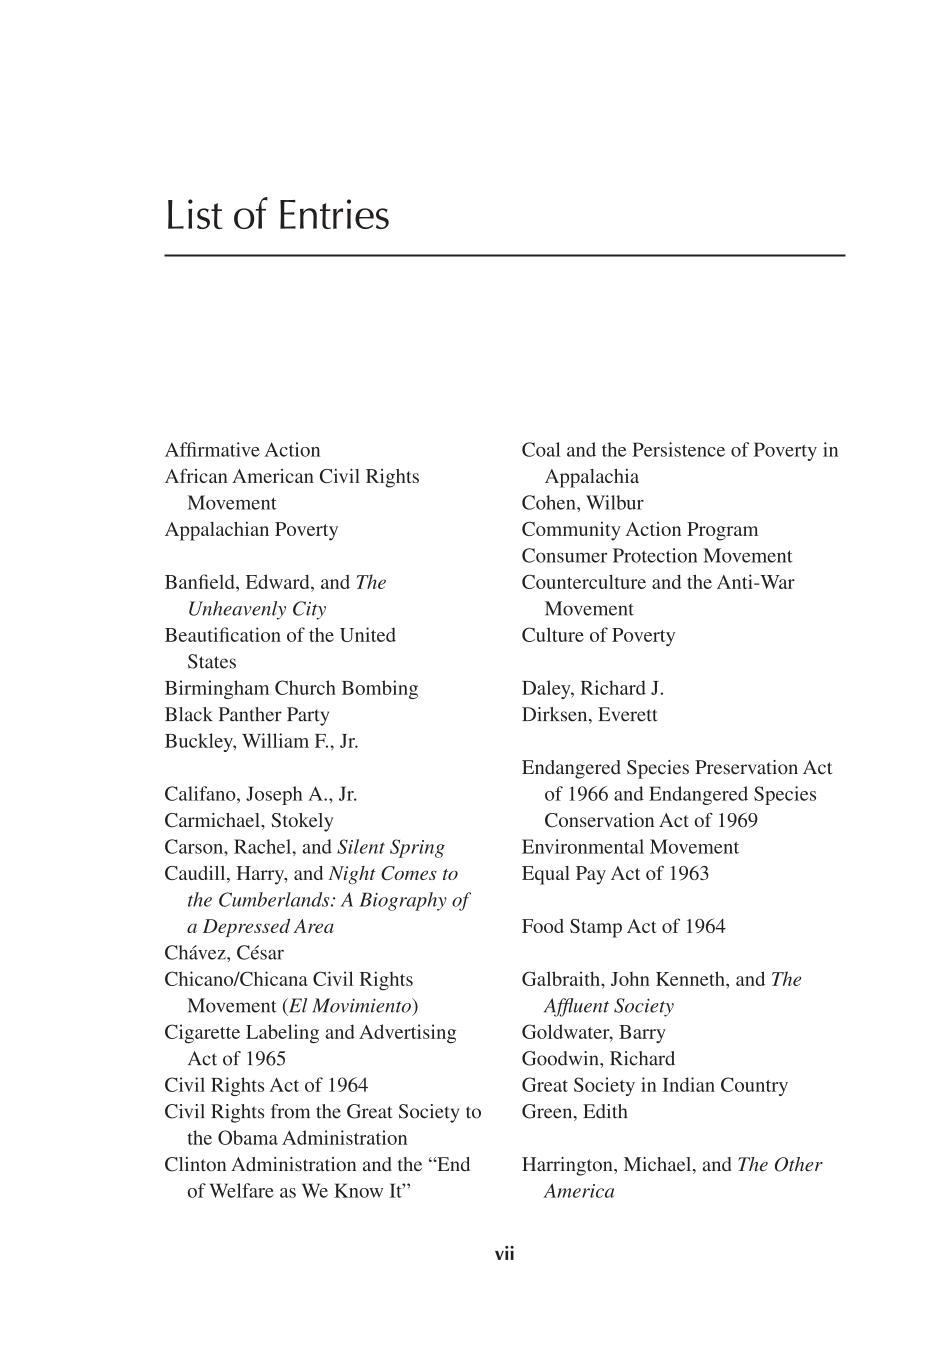 The Great Society and the War on Poverty: An Economic Legacy in Essays and Documents page vii